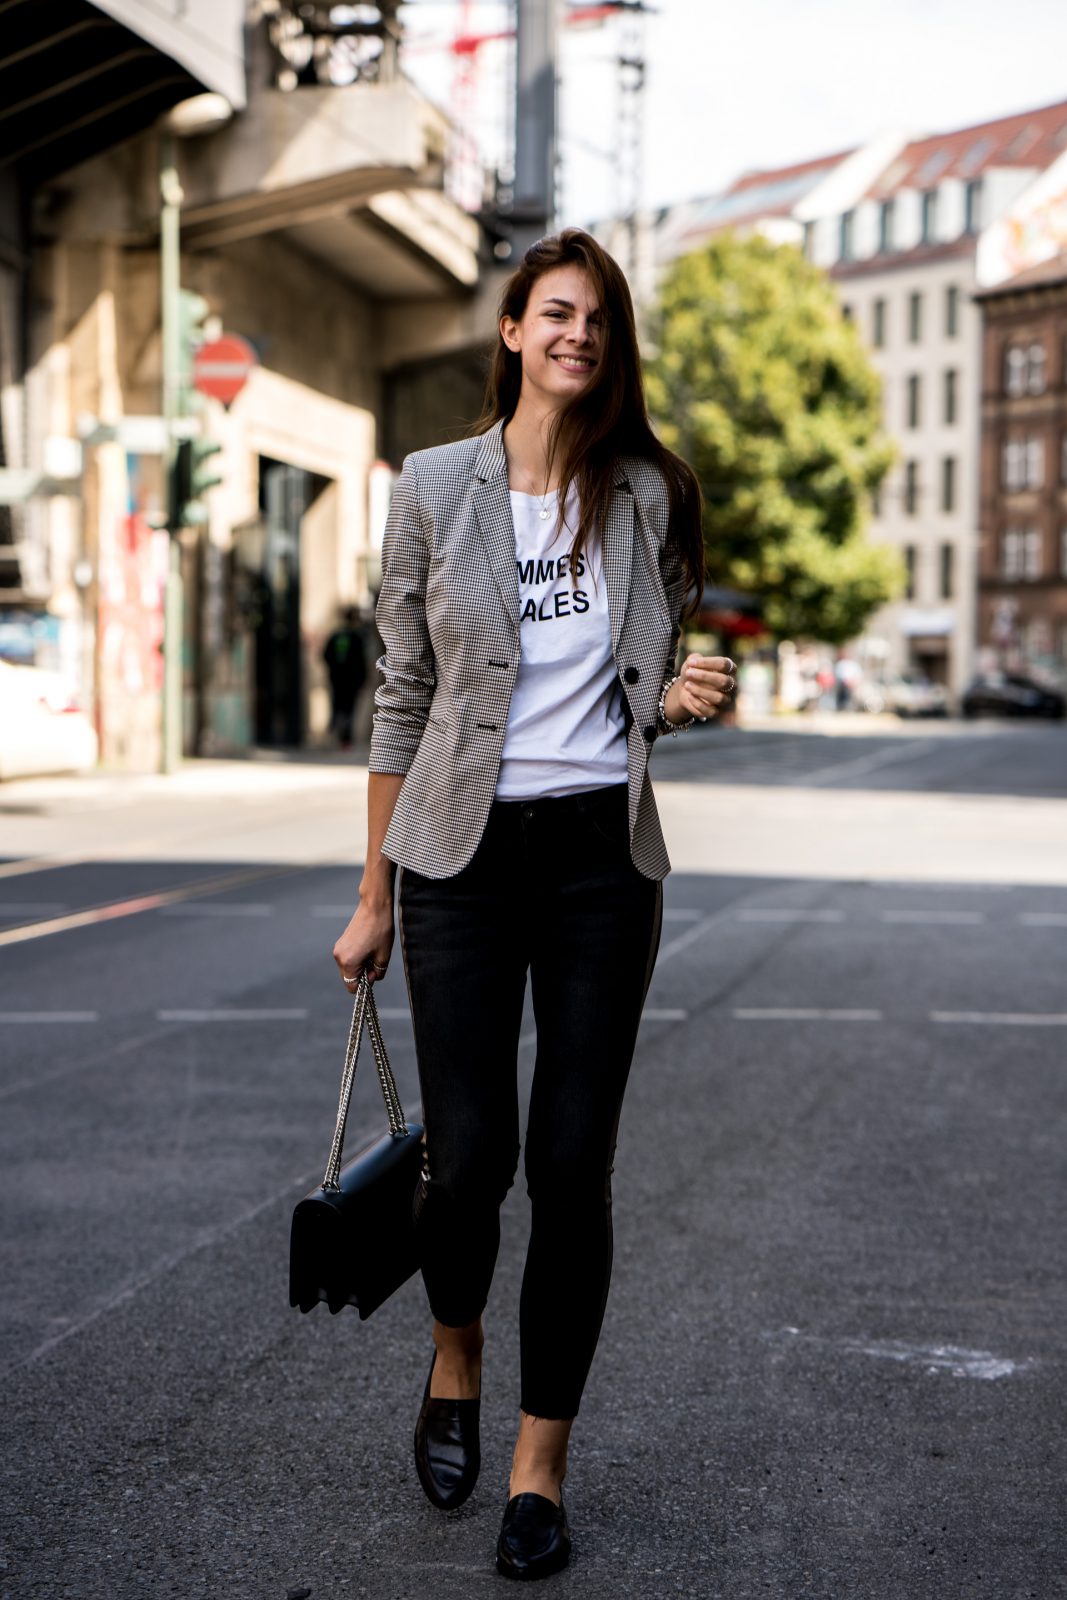 Slim Fit Jeans casual chic styled || Fashionblog Berlin